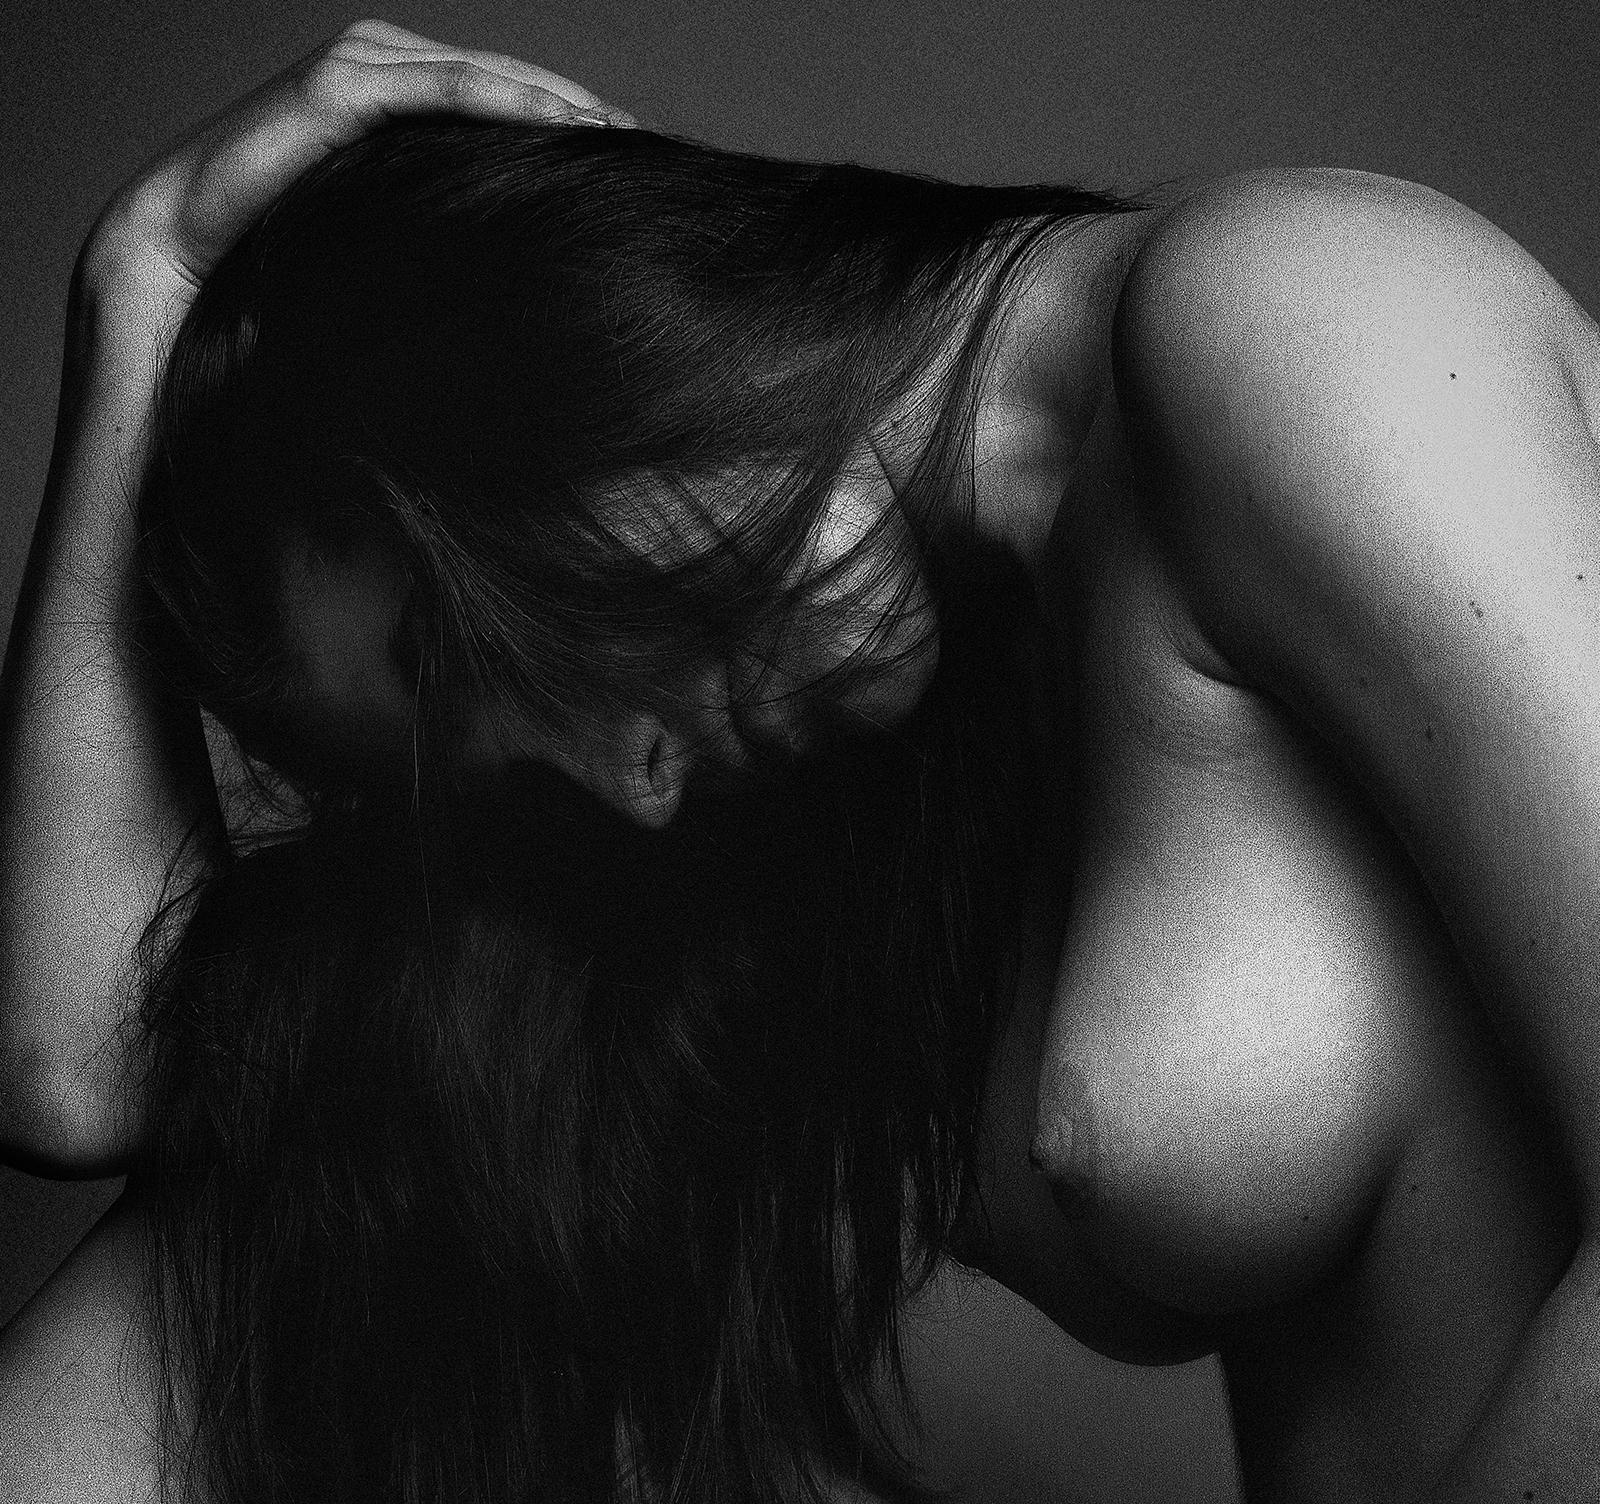 Sophie- Signed limited edition contemporary print, Black white, Nude woman - Photograph by Ian Sanderson